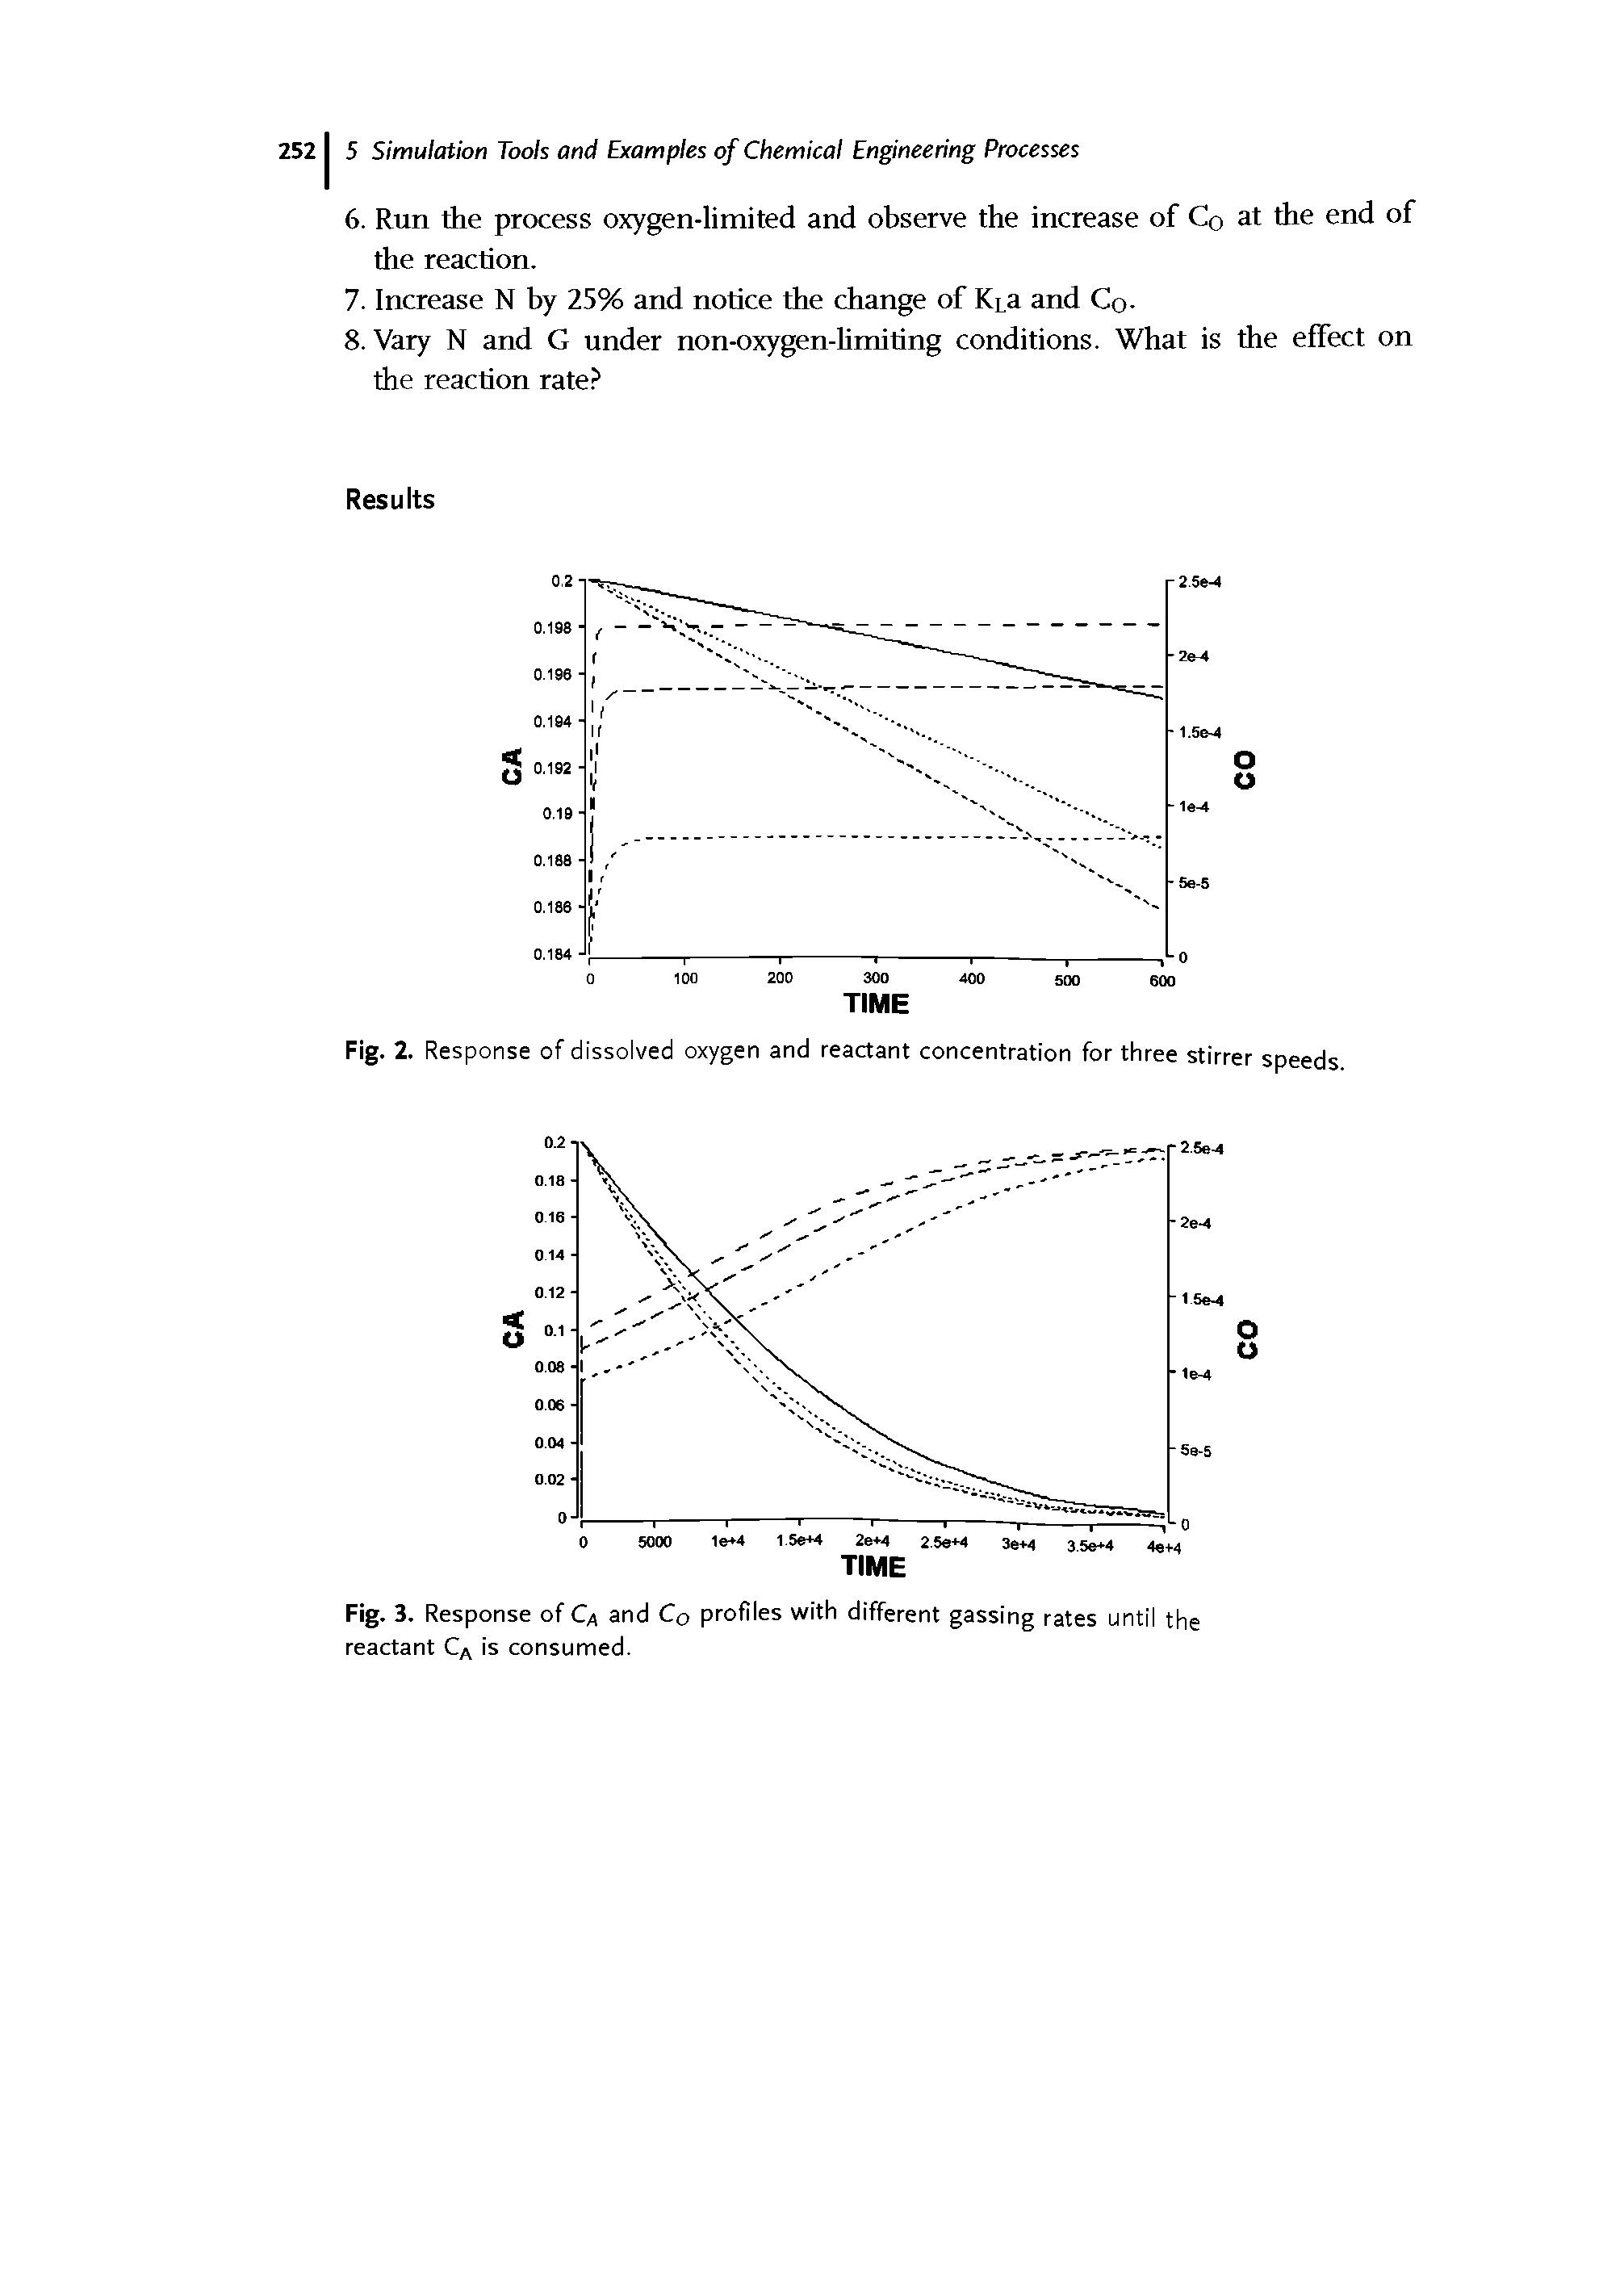 Fig. 3. Response of Q and C0 profiles with different gassing rates until the reactant CA is consumed.